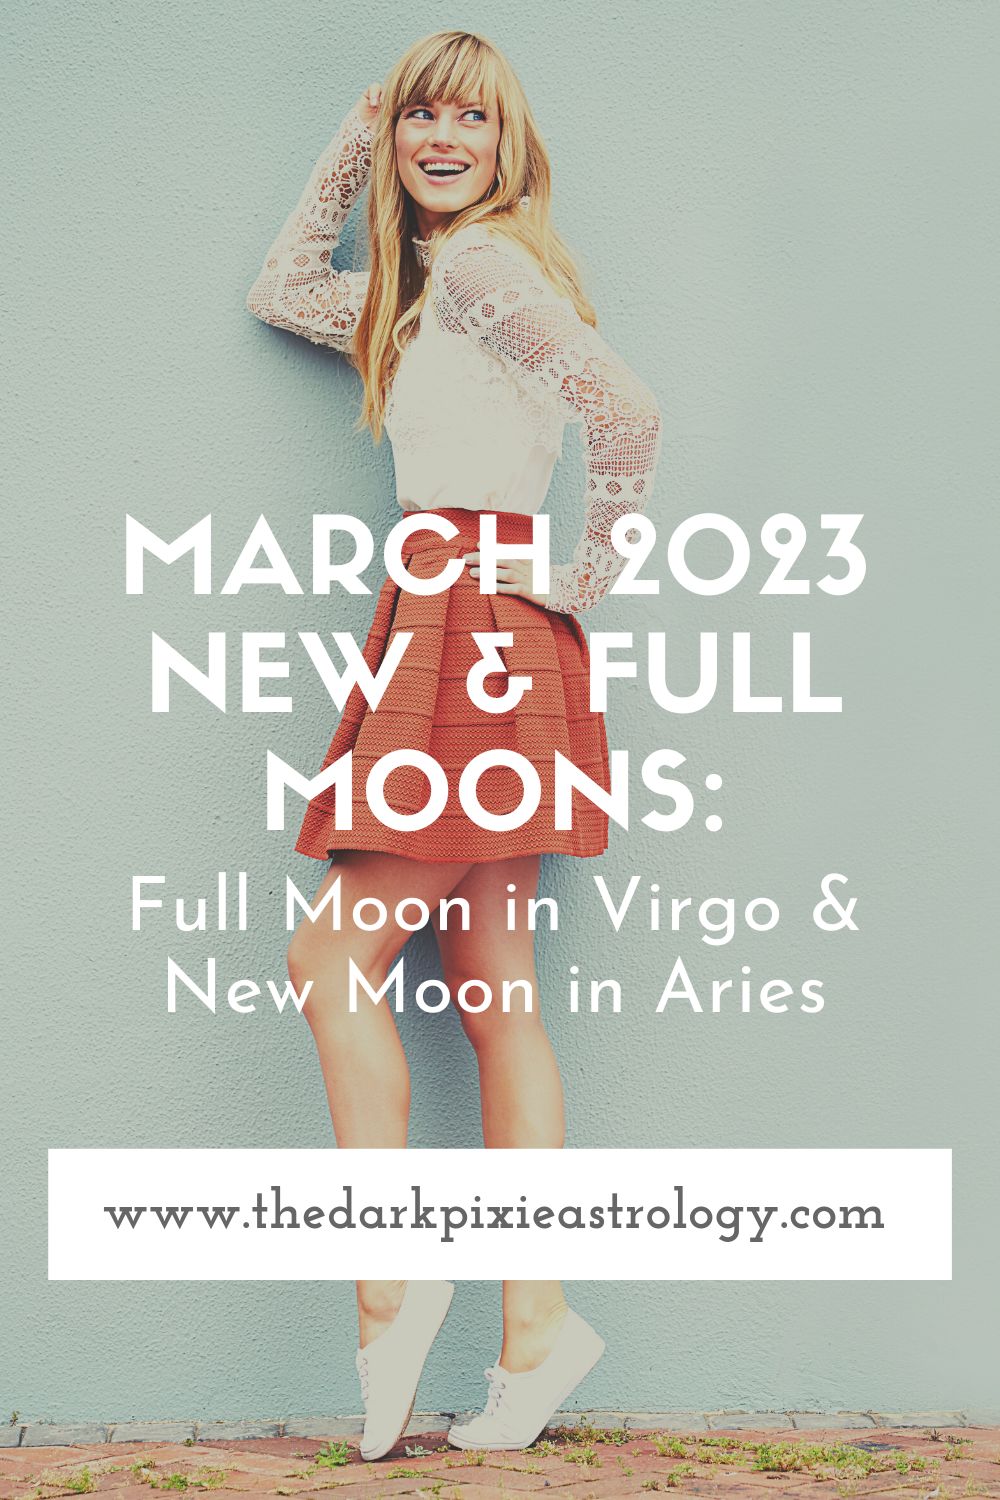 March 2023 New & Full Moons: Full Moon in Virgo & New Moon in Aries - The Dark Pixie Astrology